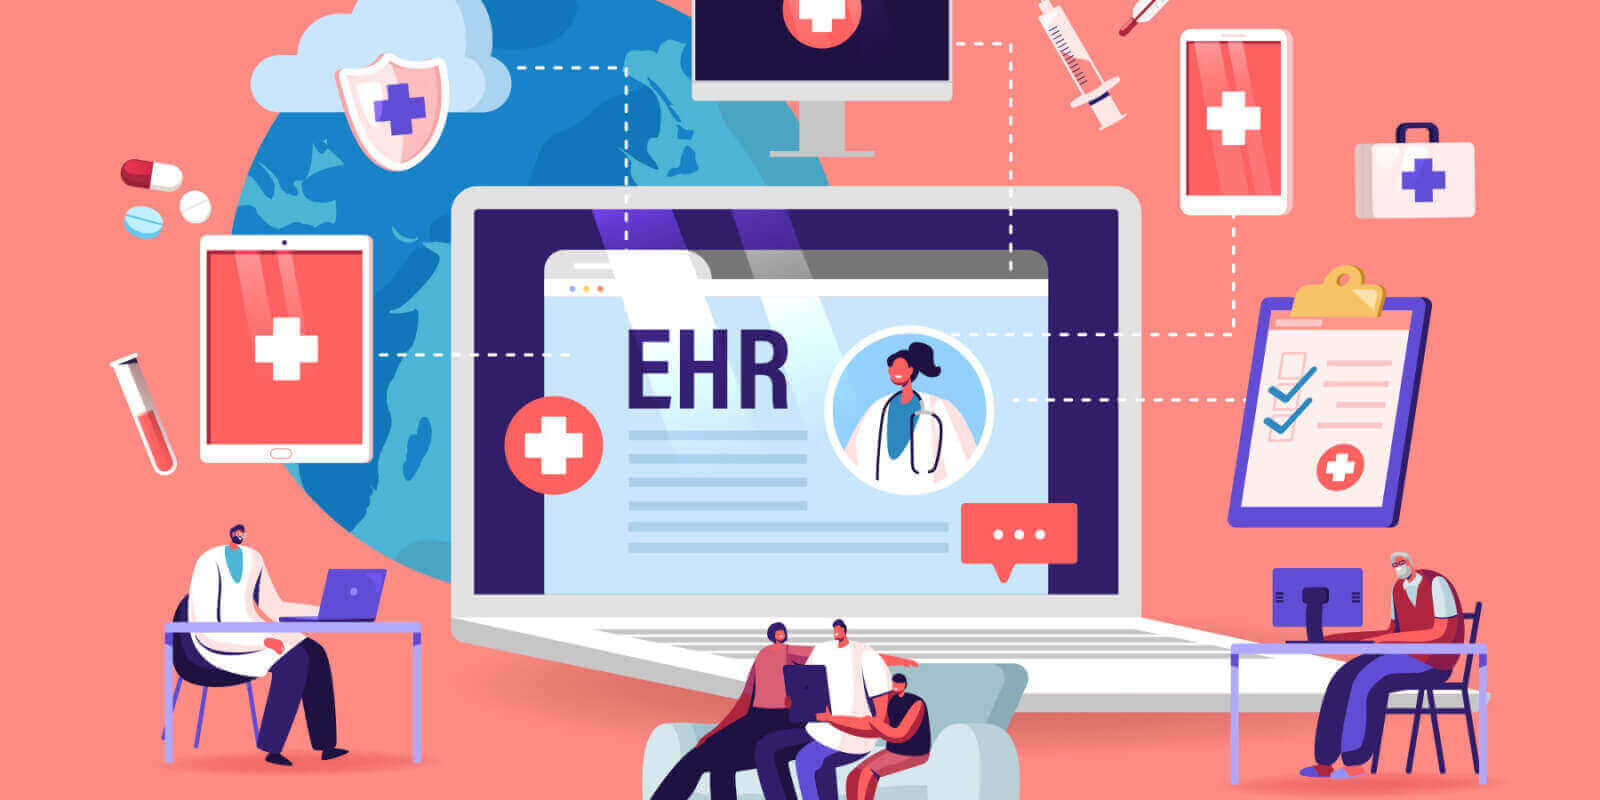 All You Need to Know About Electronic Health Records (EHR)